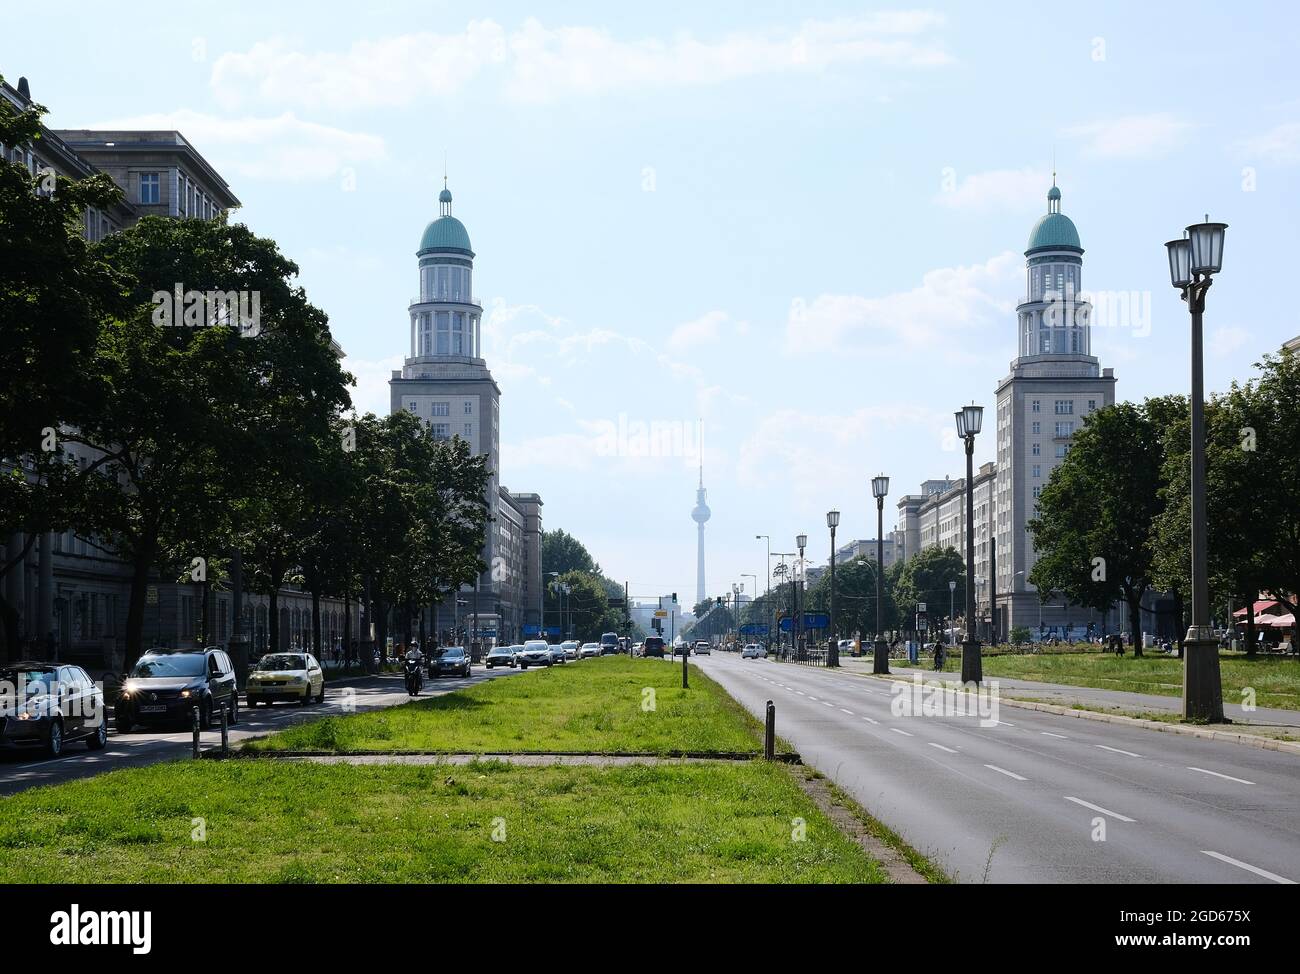 Berlin, Germany, June 17, 2021, view through Frankurter Tor towards Alexanderplatz with Karl-Marx-Allee and TV tower in the background Stock Photo